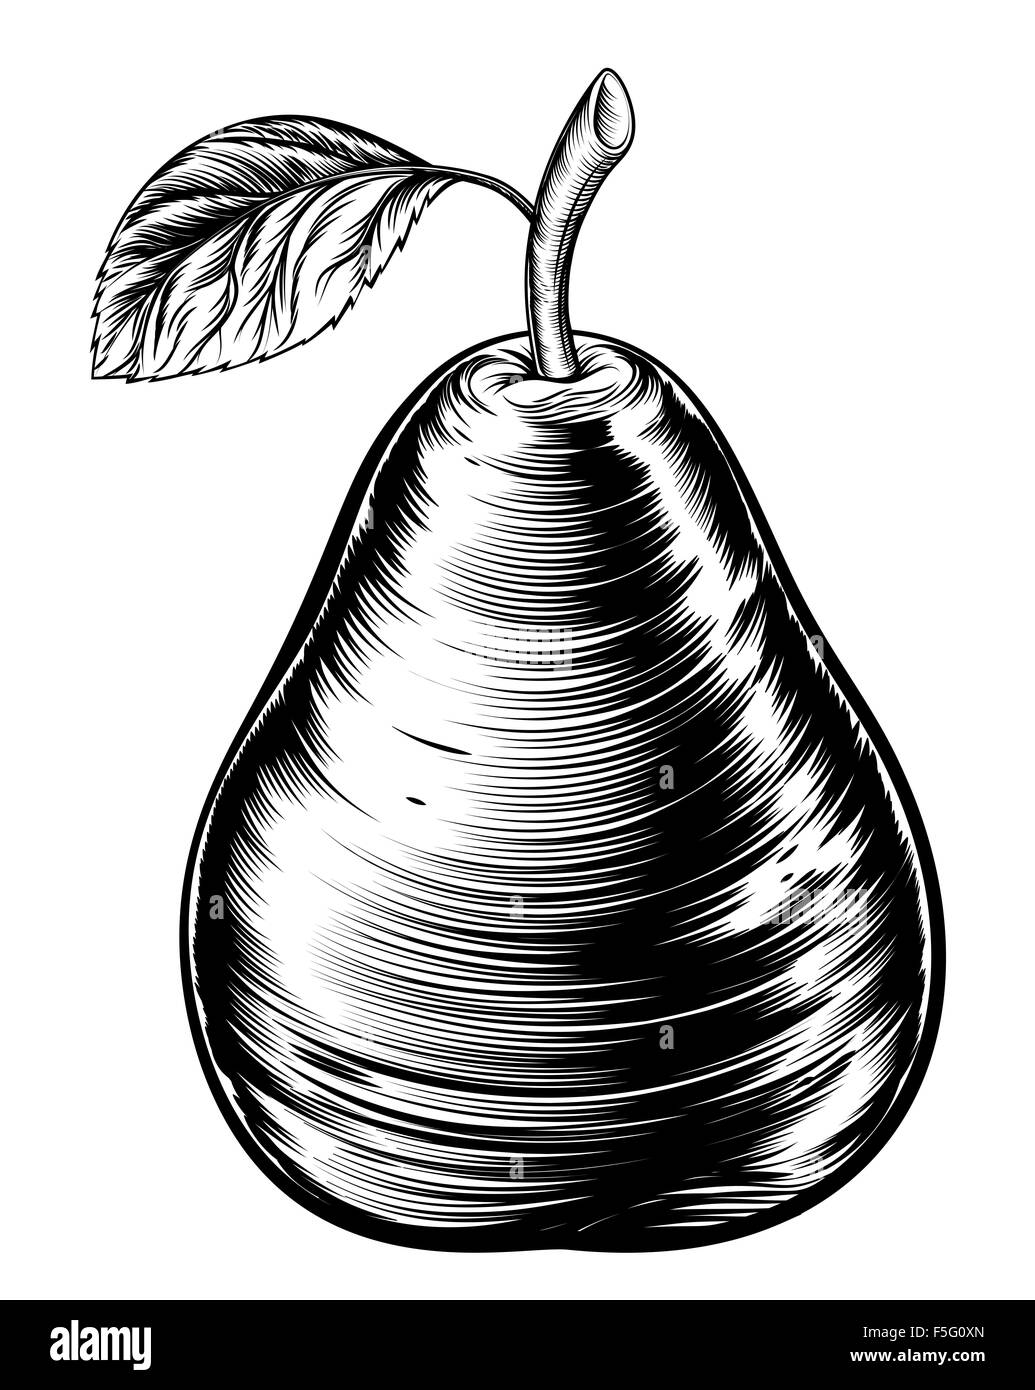 An original illustration of a pear fruit in a vintage woodcut or woodblock style Stock Photo